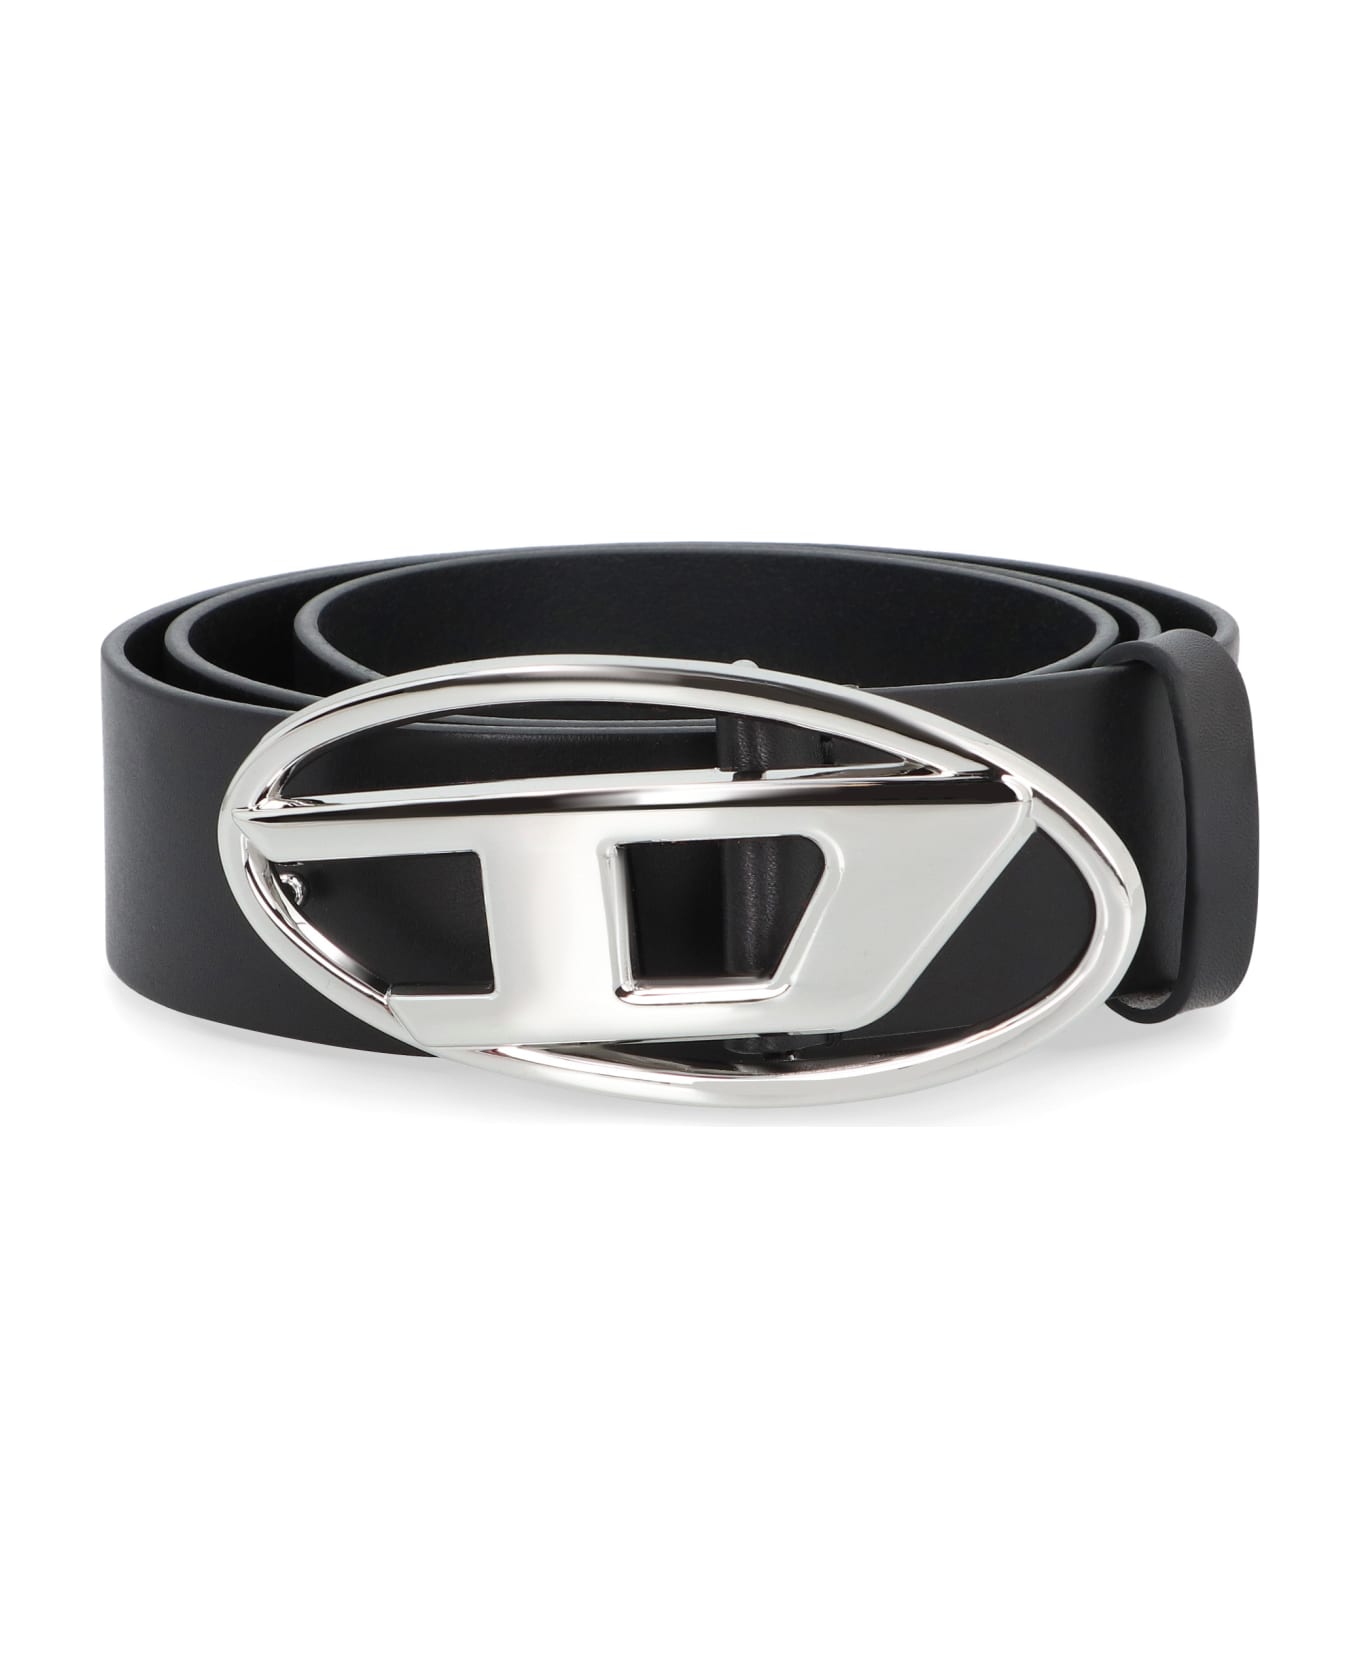 Diesel B-1dr Leather Belt - Non definito